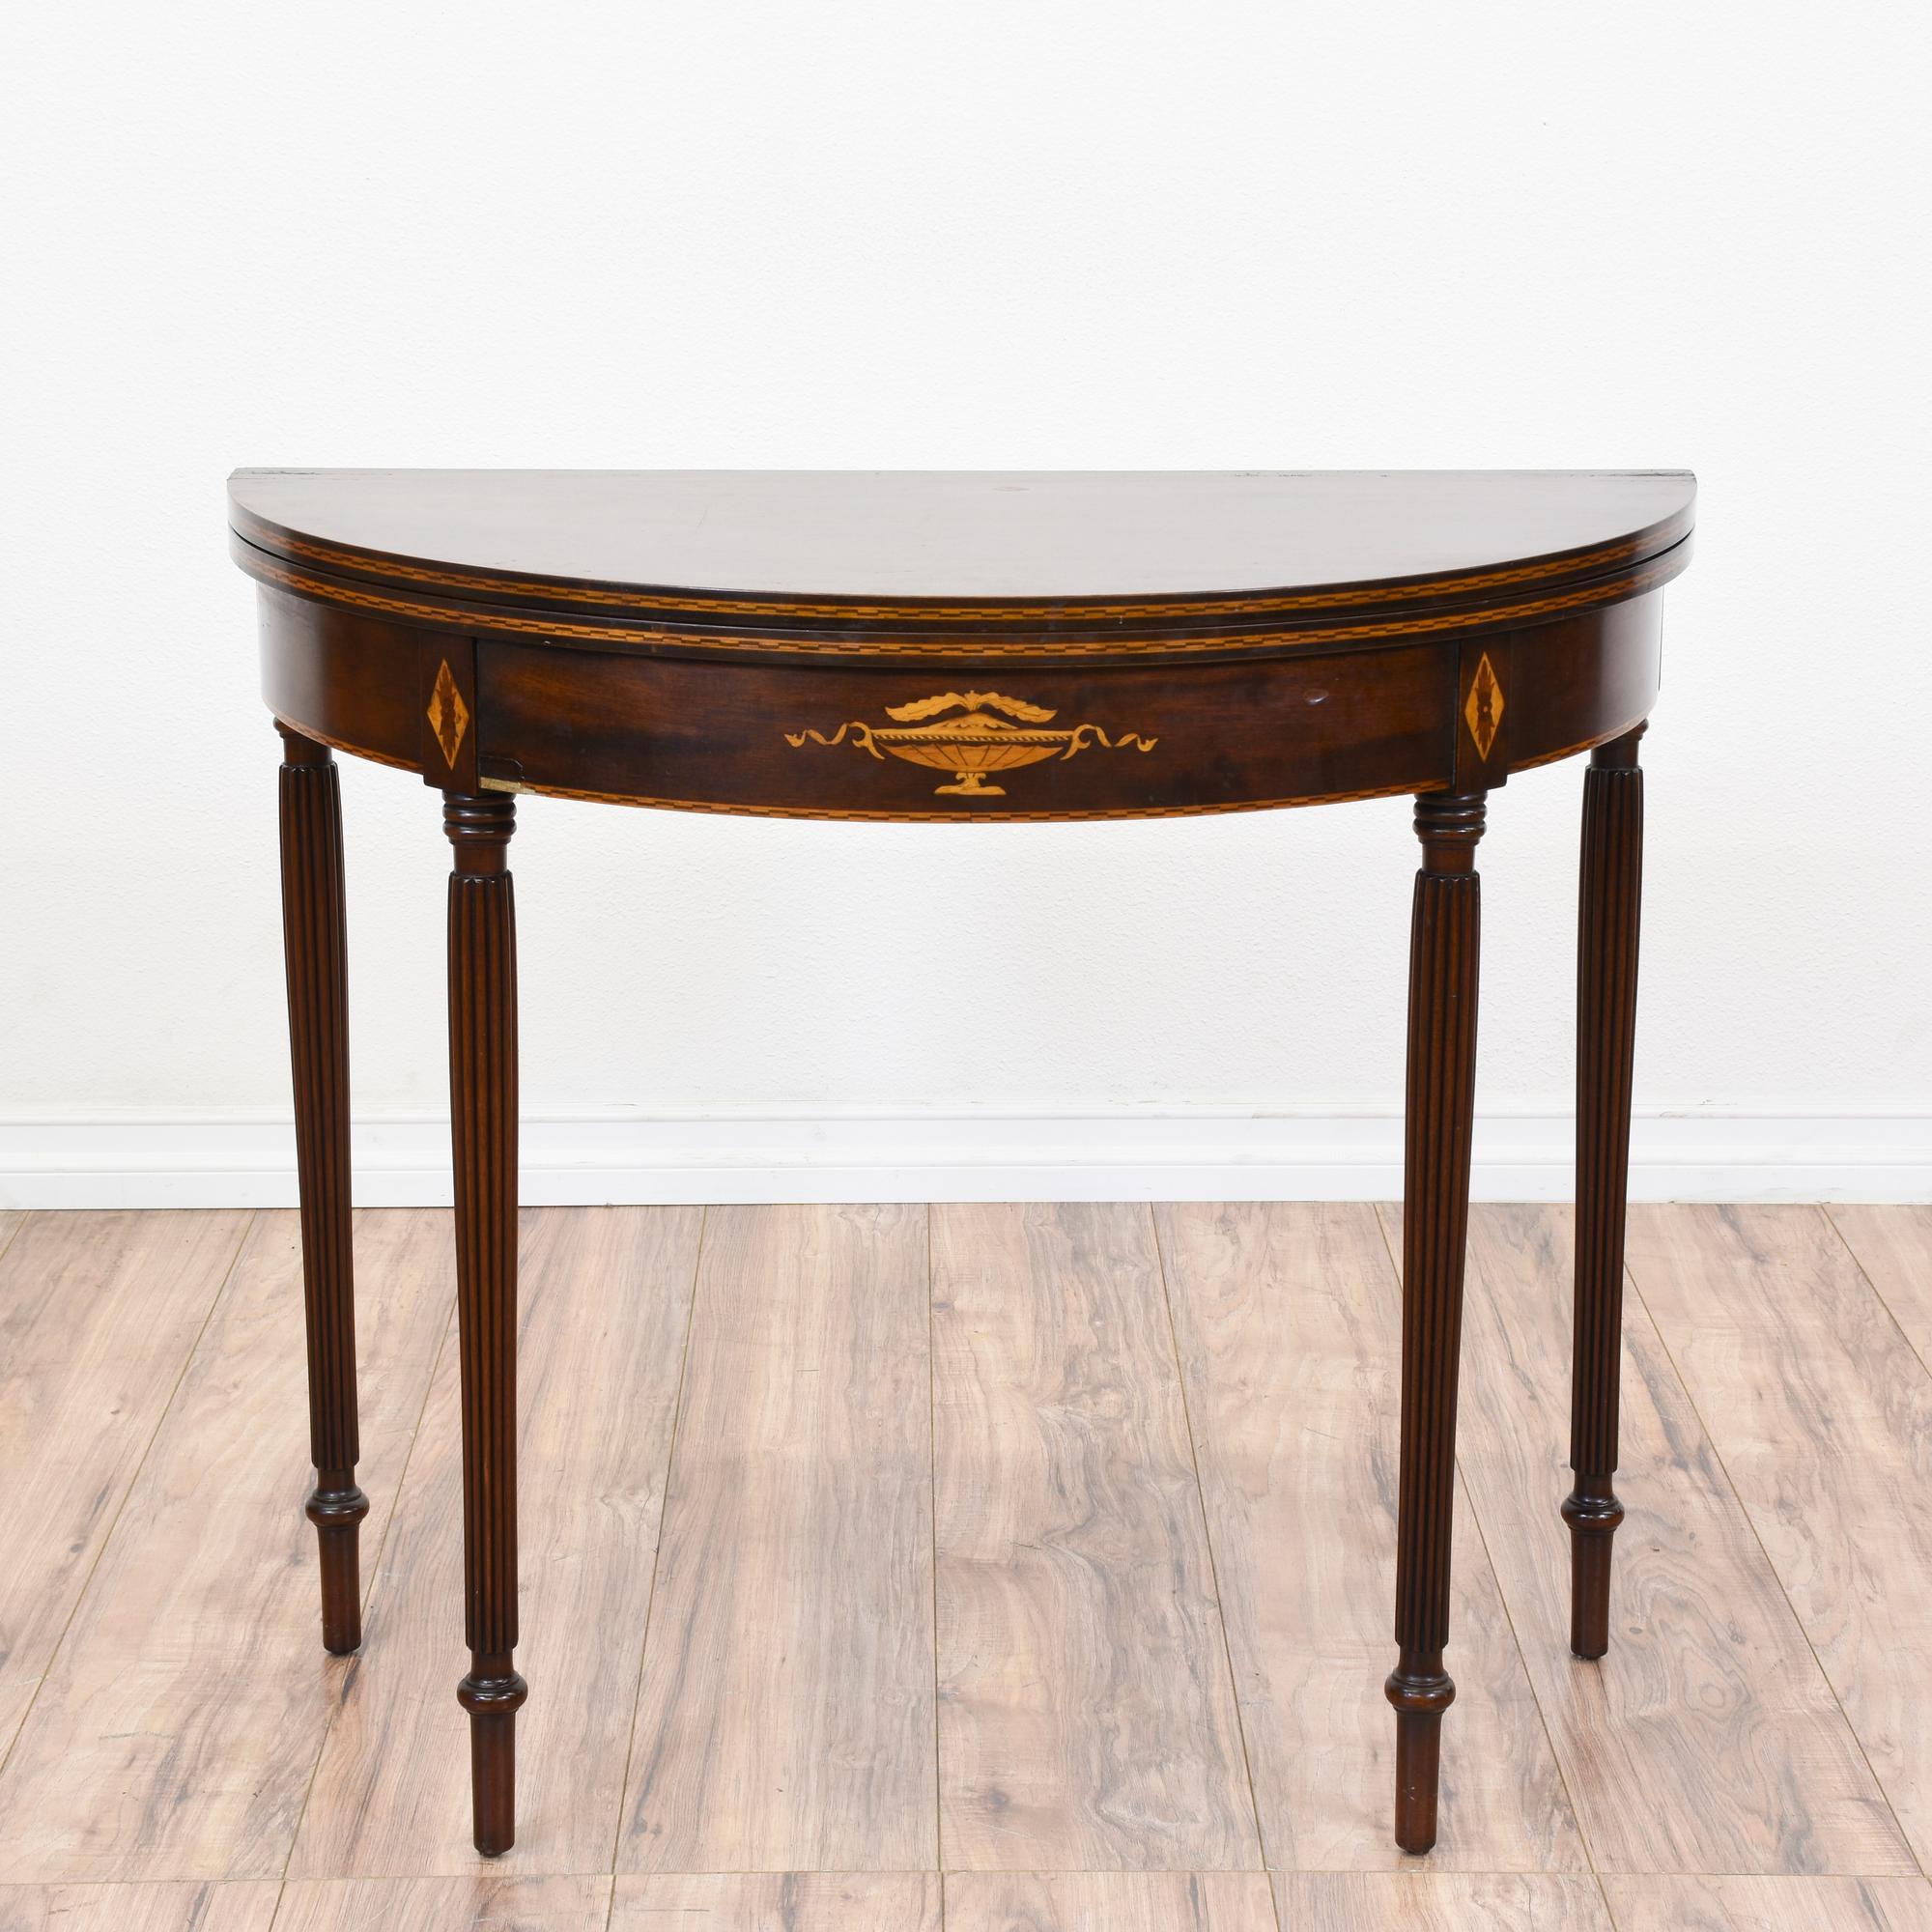 long thin coffee table the outrageous beautiful wood end furniture mesmerizing half moon accent with elegant looks wondrous interesting laminate floor under demi lune and semi